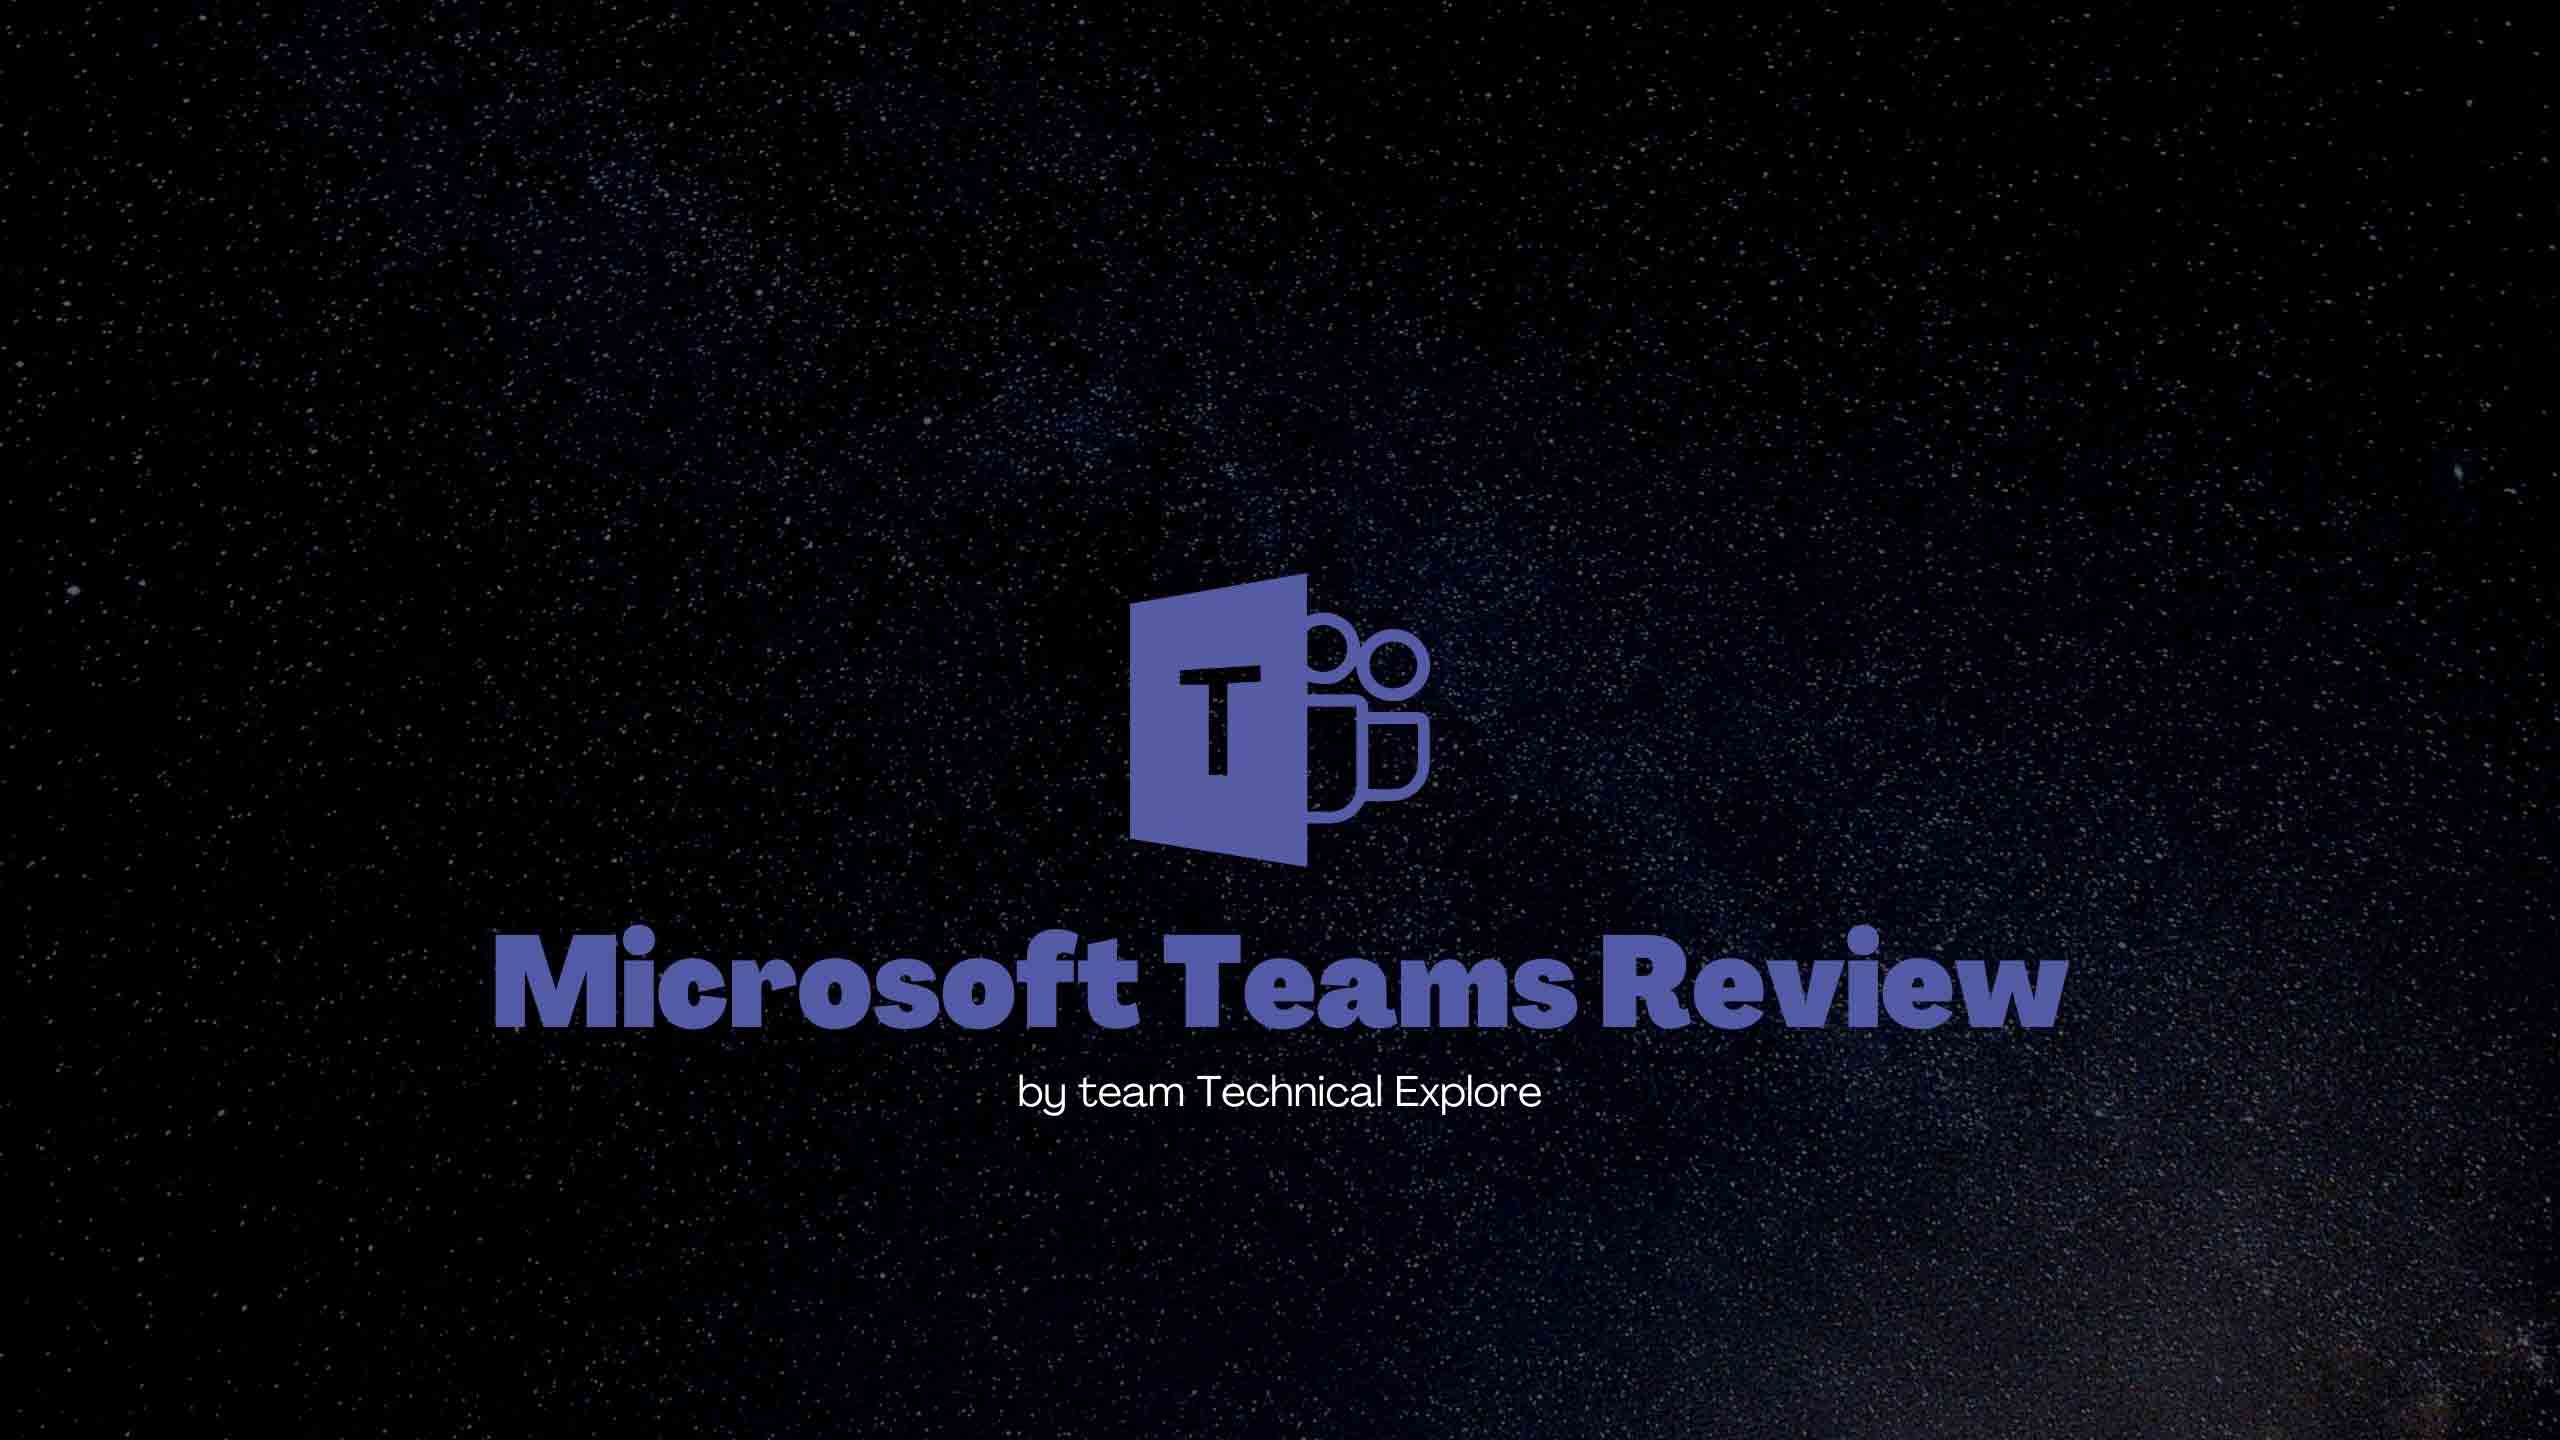 Evaluating Microsoft Teams as a business communication tool